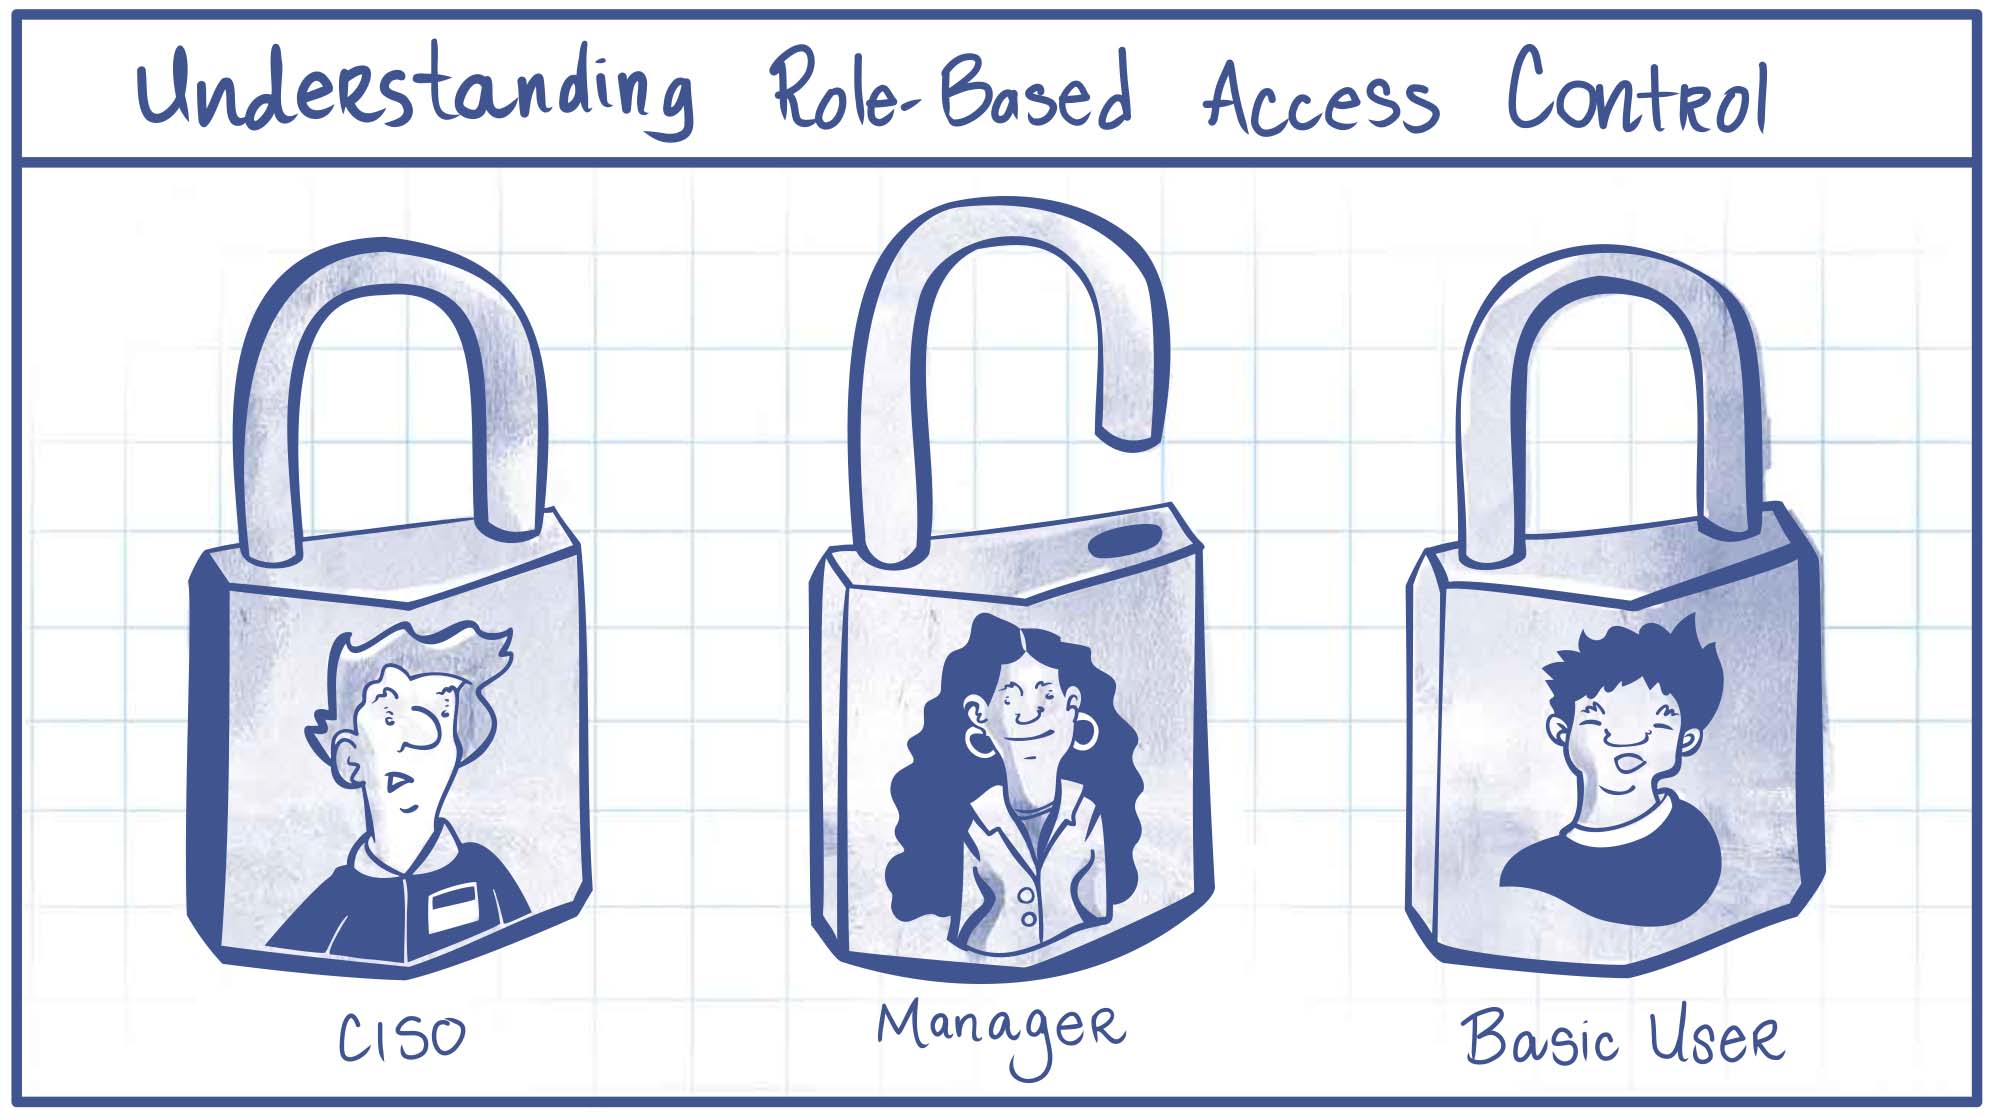 What is Role-based access control (RBAC)?